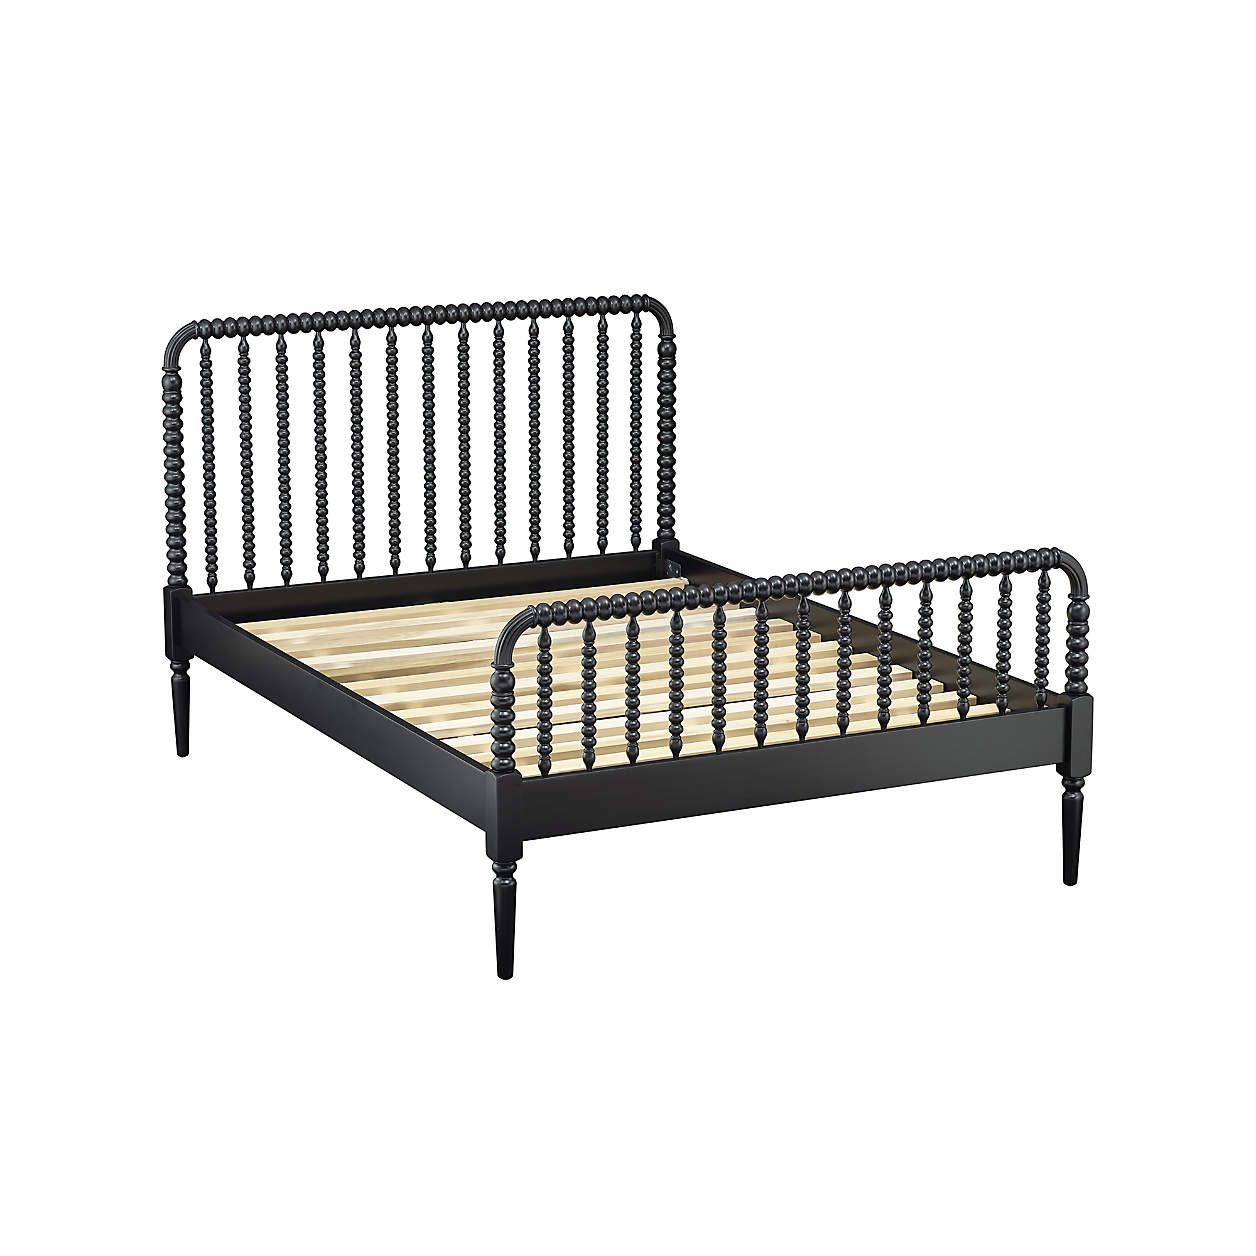 Jenny Lind Maple Bed | Crate and Barrel | Crate & Barrel